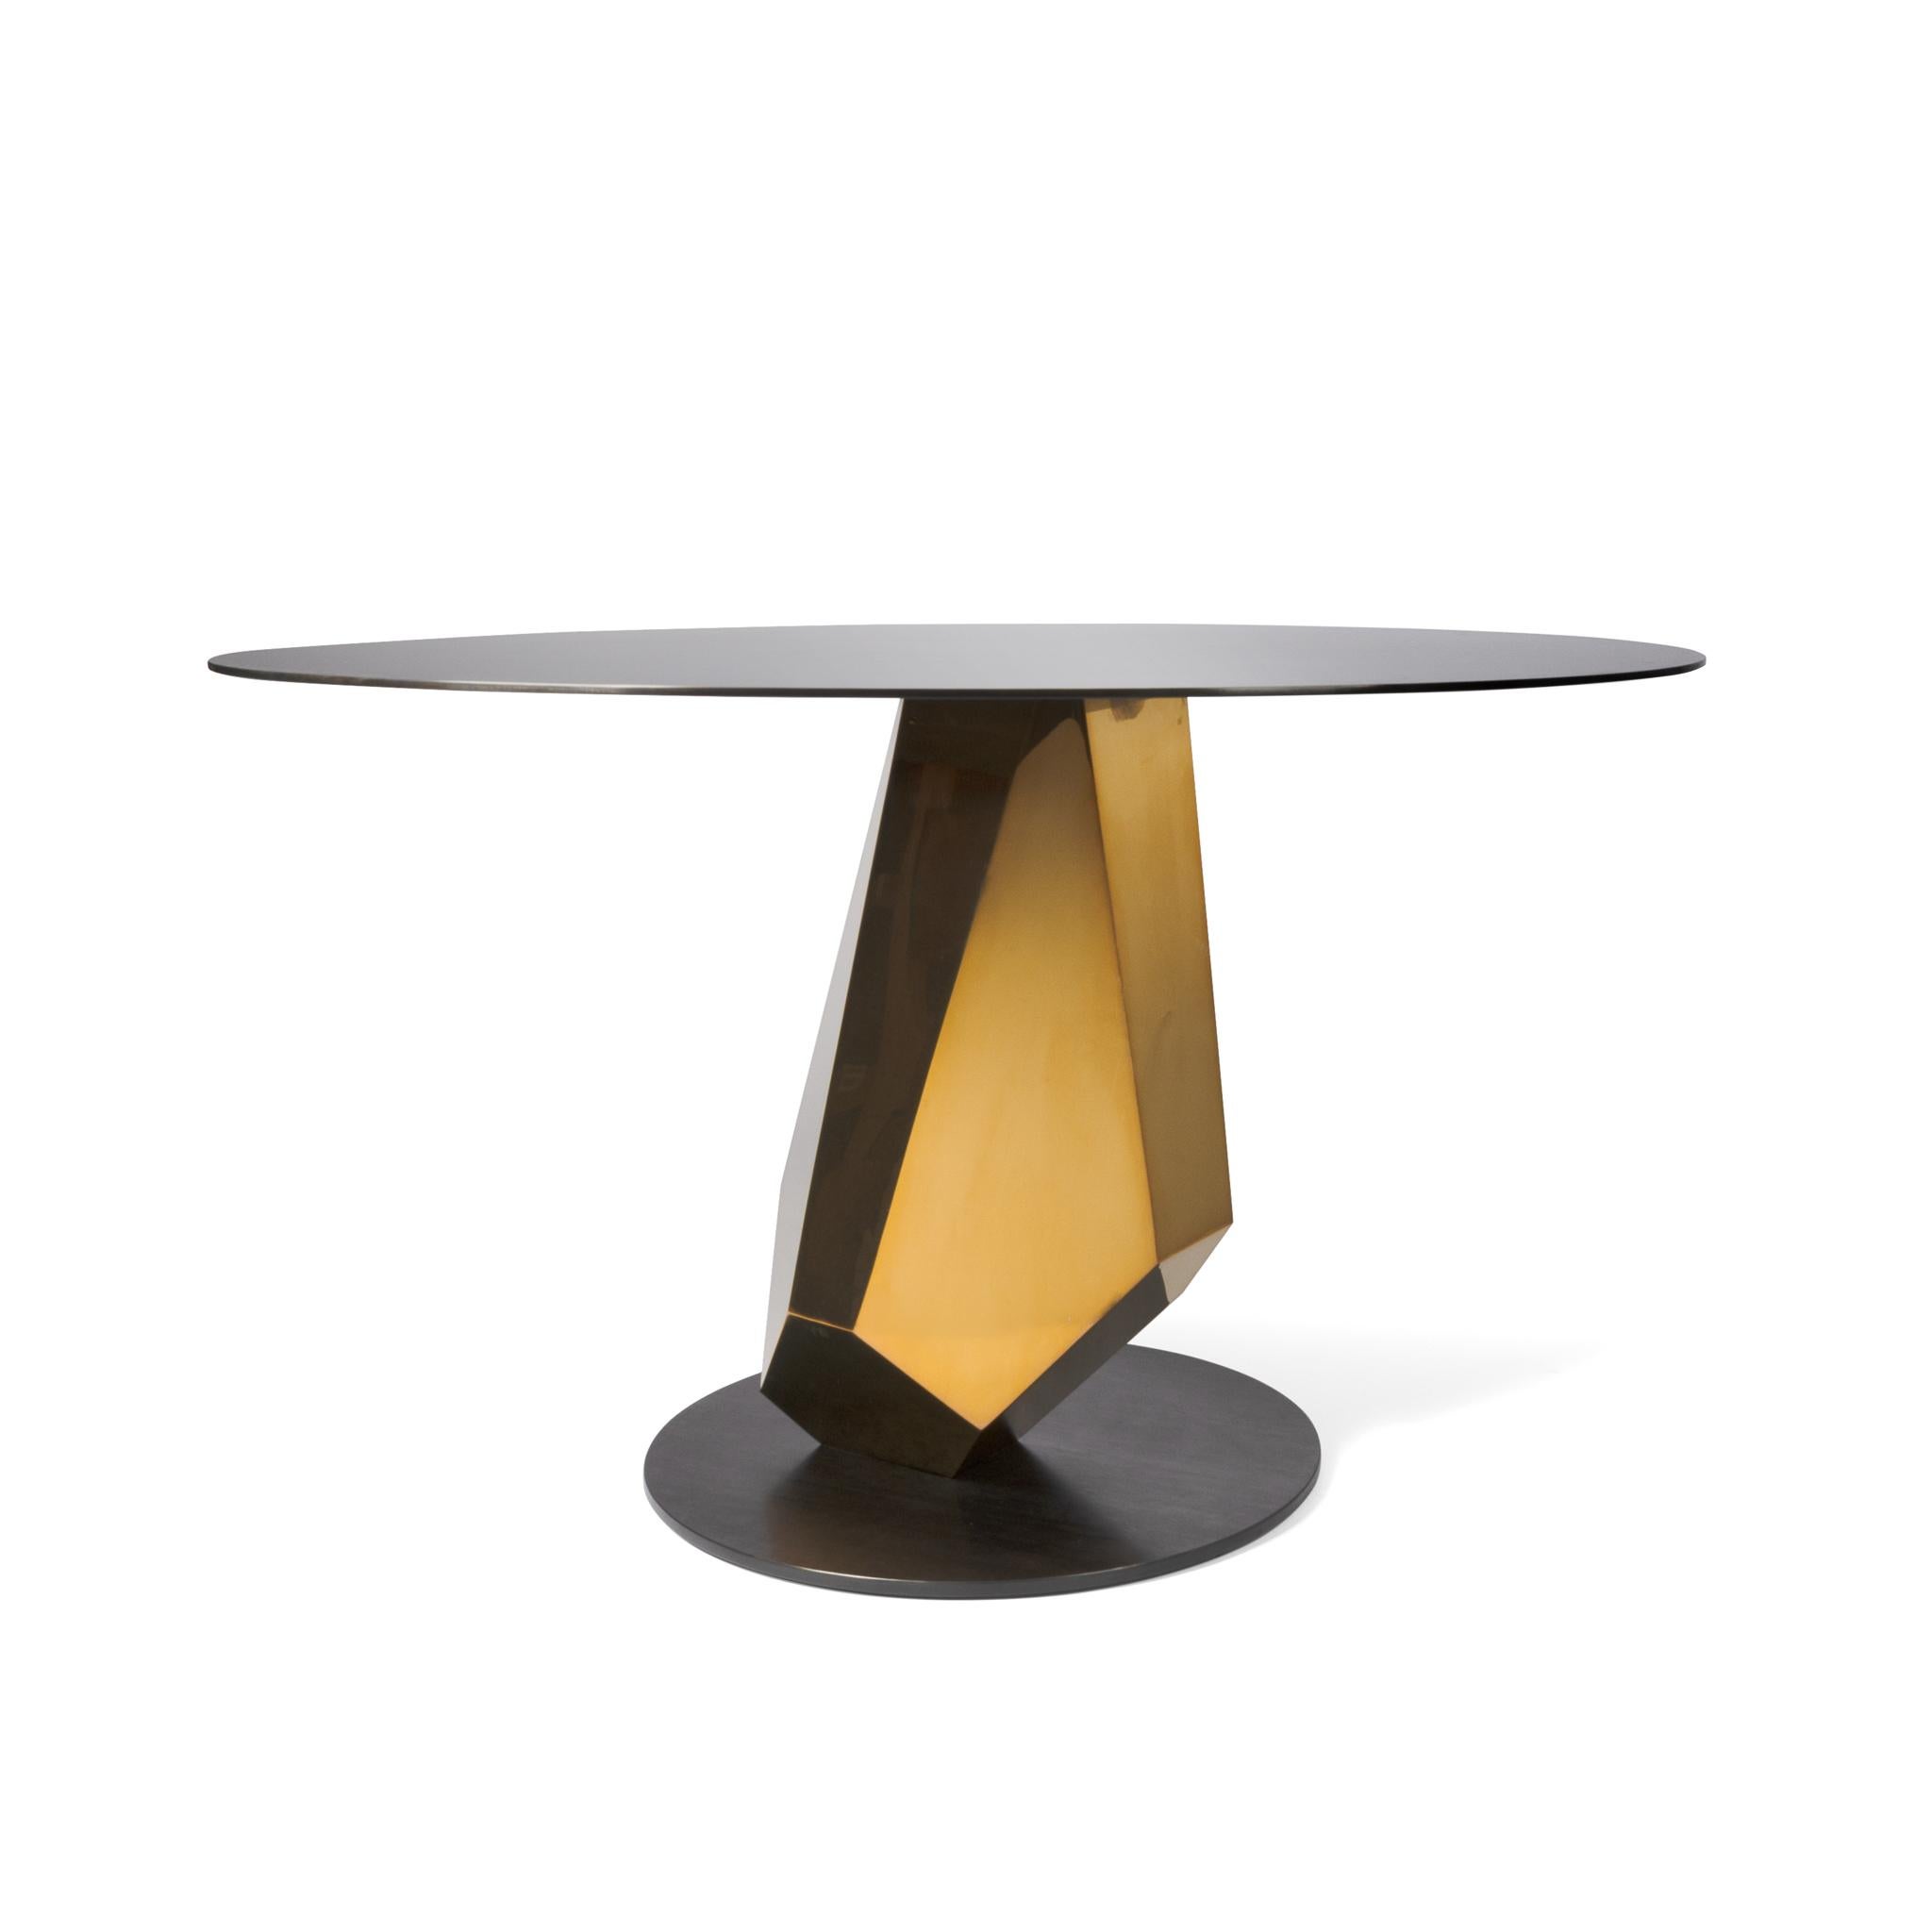 Modern Geometric Sculptural Metal Table Mirror Polished Bronze & Blackened In Stock For Sale